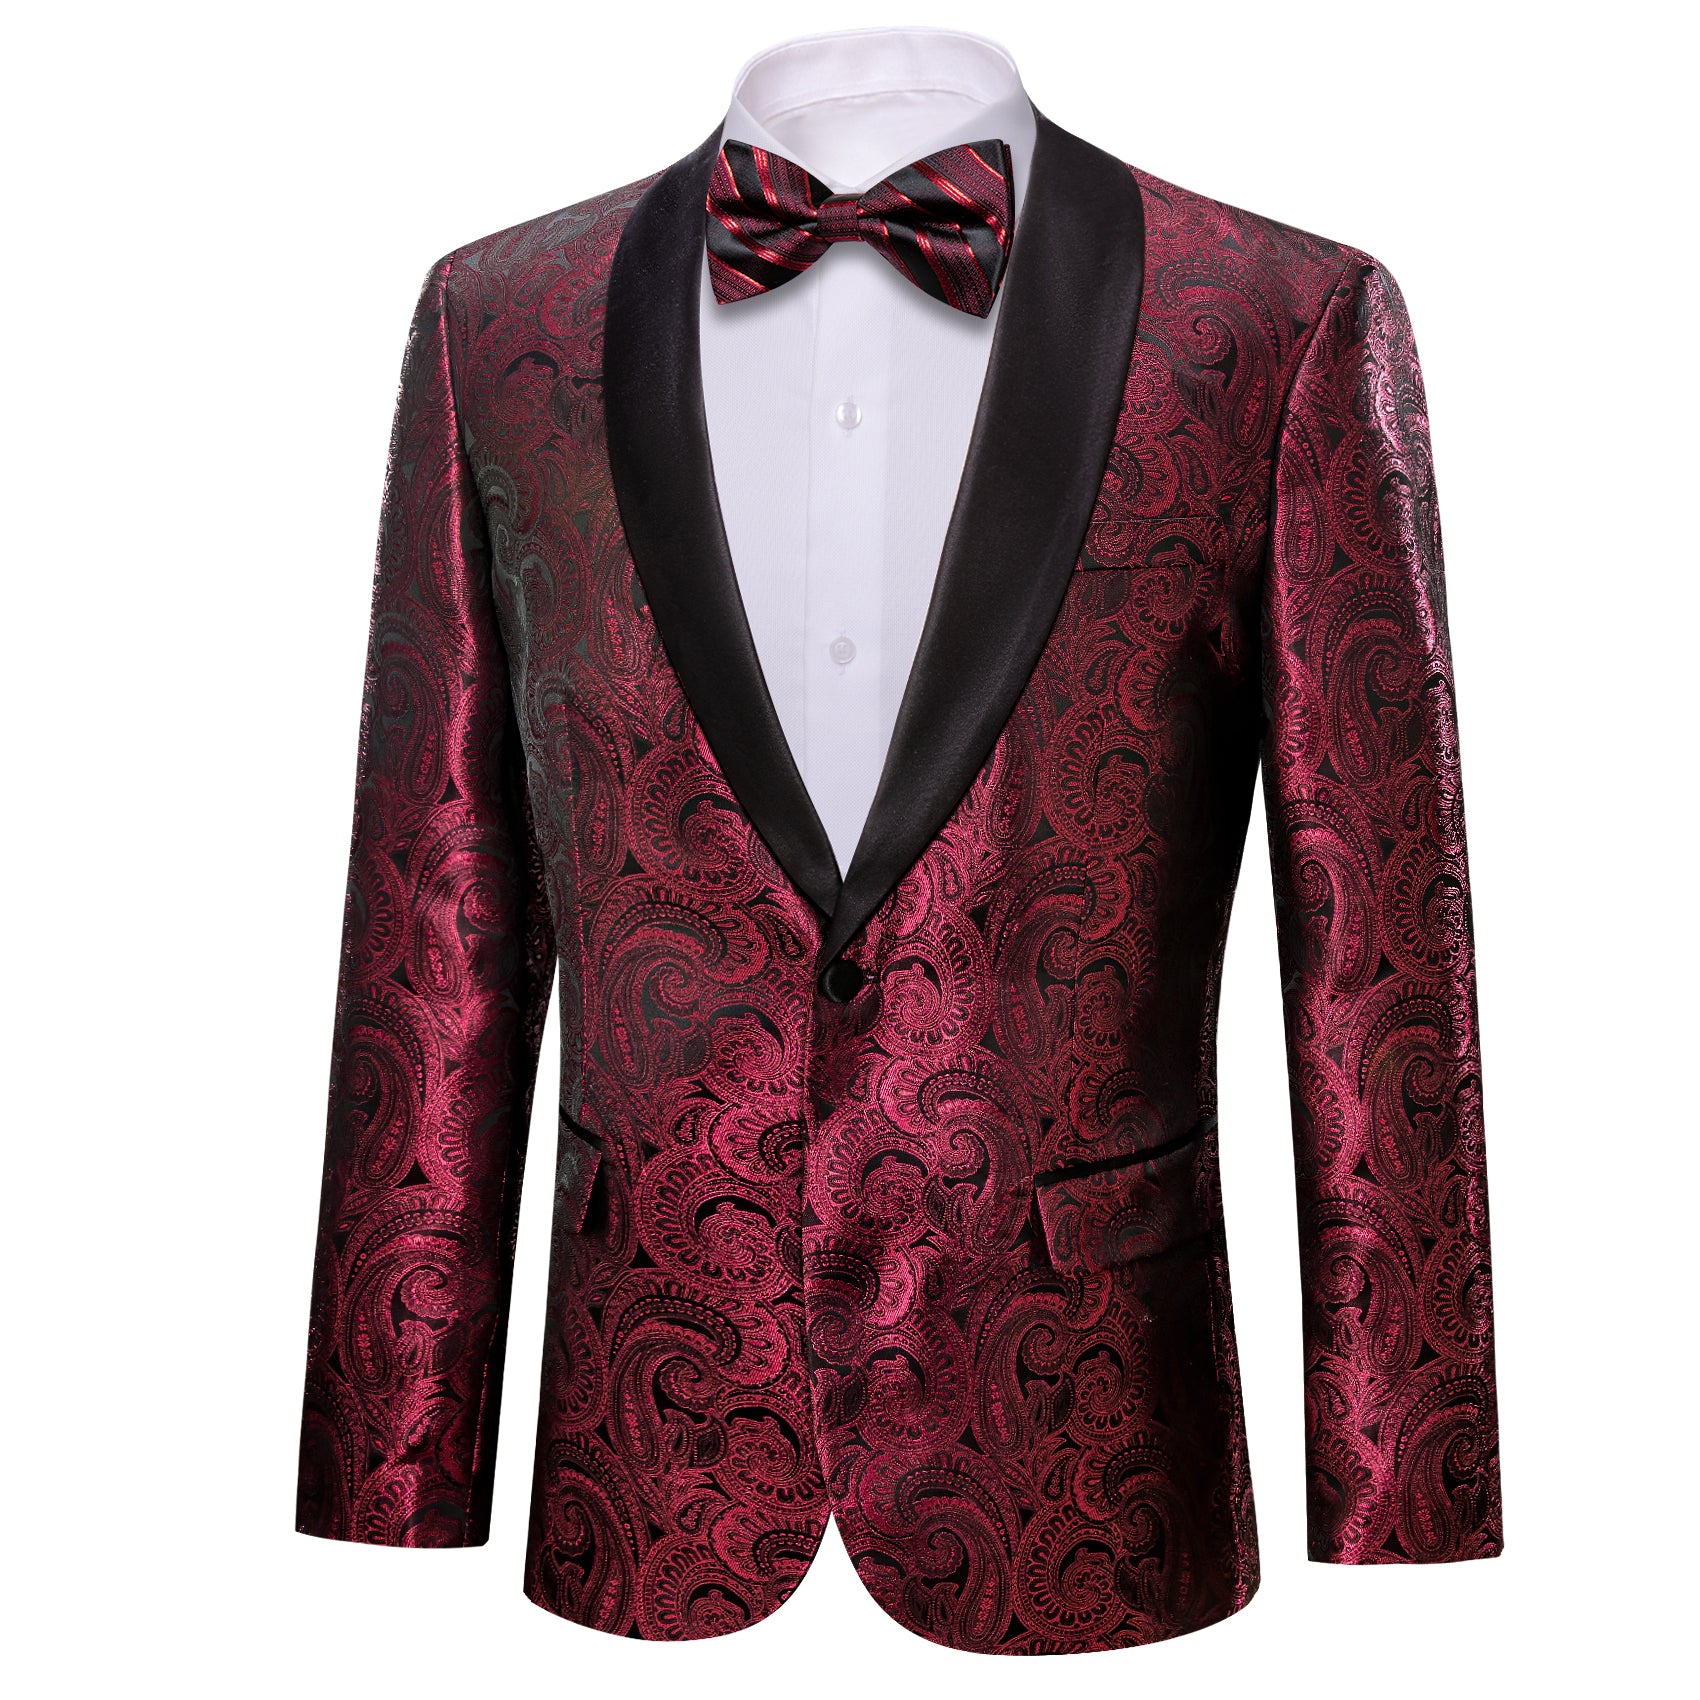 Barry.wang Men's Suit Dark Red Jacquard Silk Floral Shawl Collar Suit